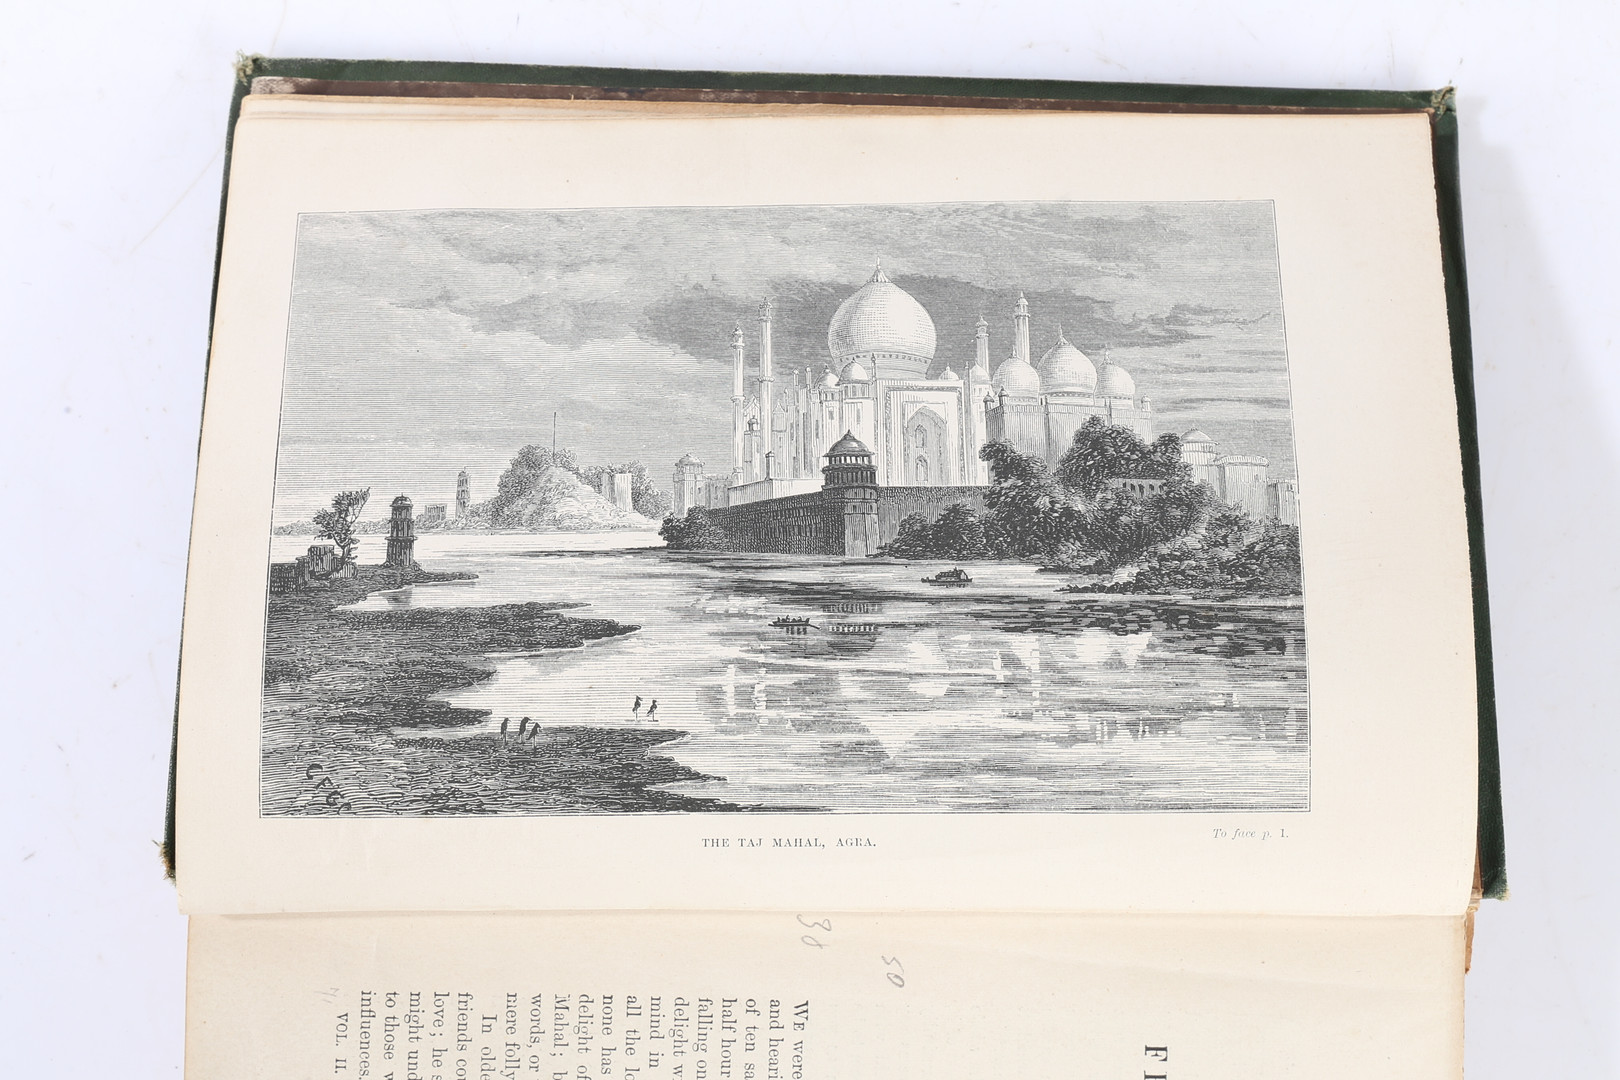 CONSTANCE F. GORDON CUMMING "FROM THE HEBRIDES TO THE HIMALAYAS" 1ST EDITION VOLUMES 1 & 2. - Image 10 of 13